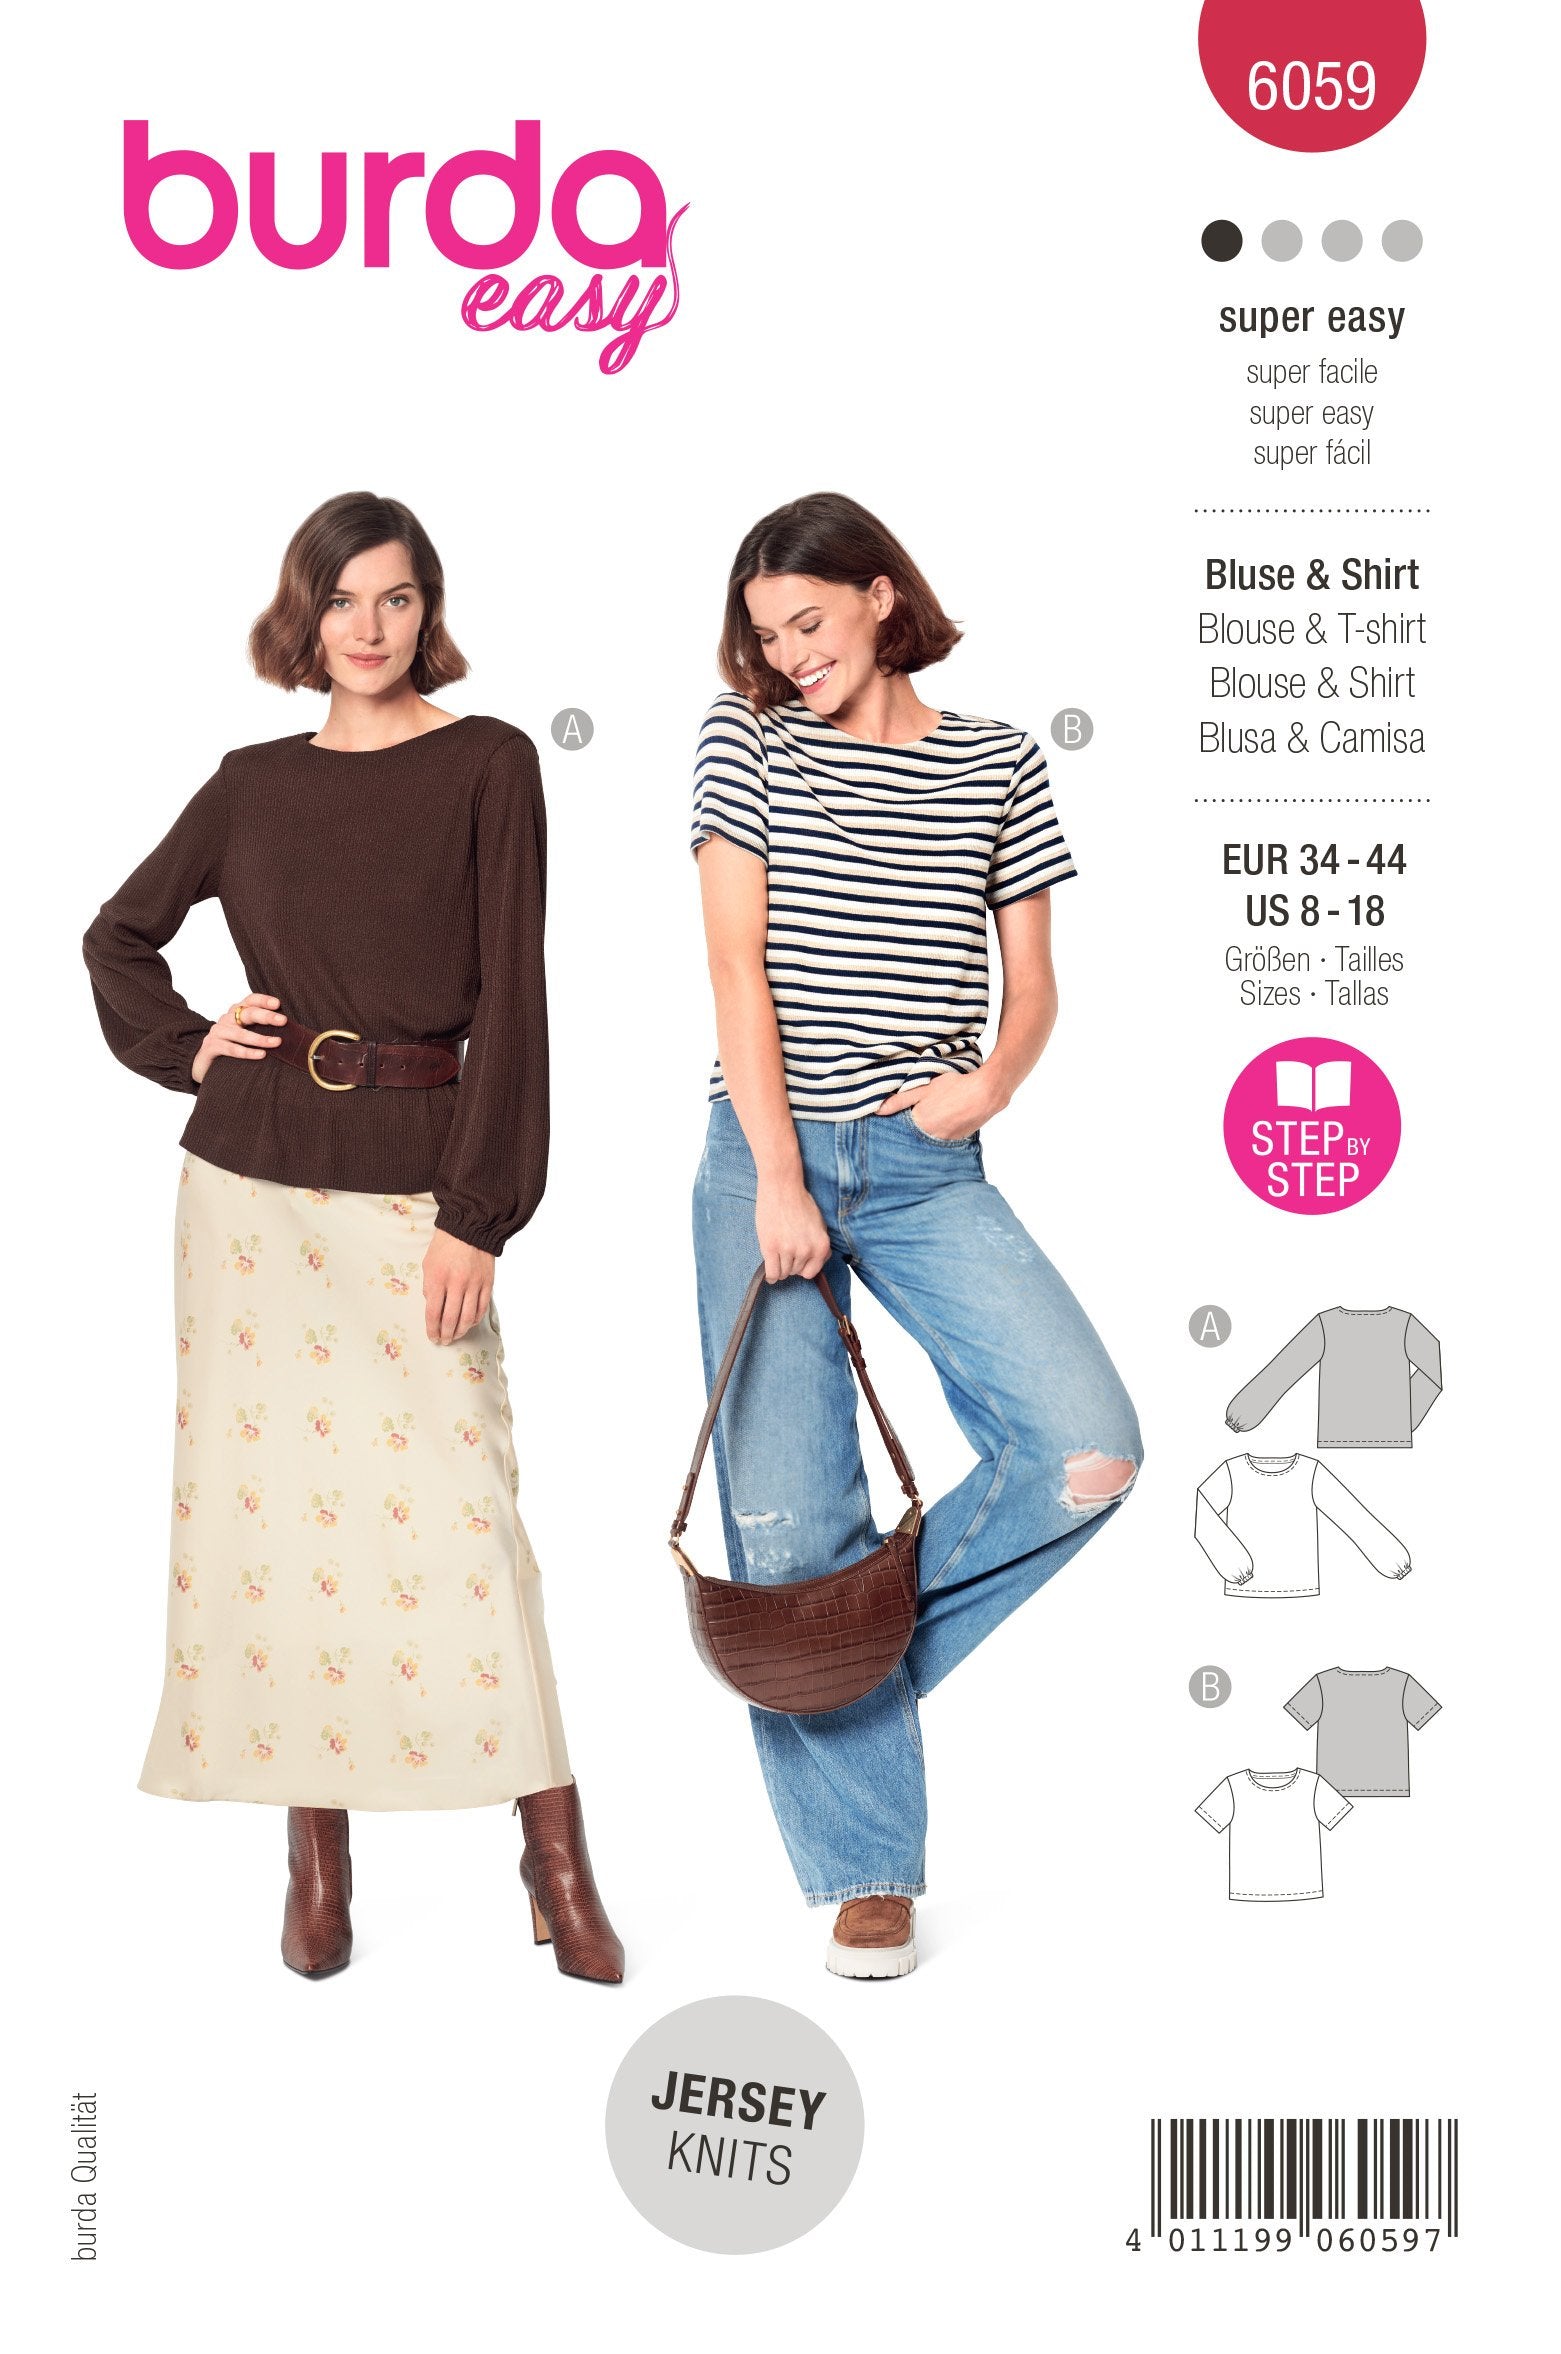 Burda Sewing Pattern 6059 Top and Blouse from Jaycotts Sewing Supplies